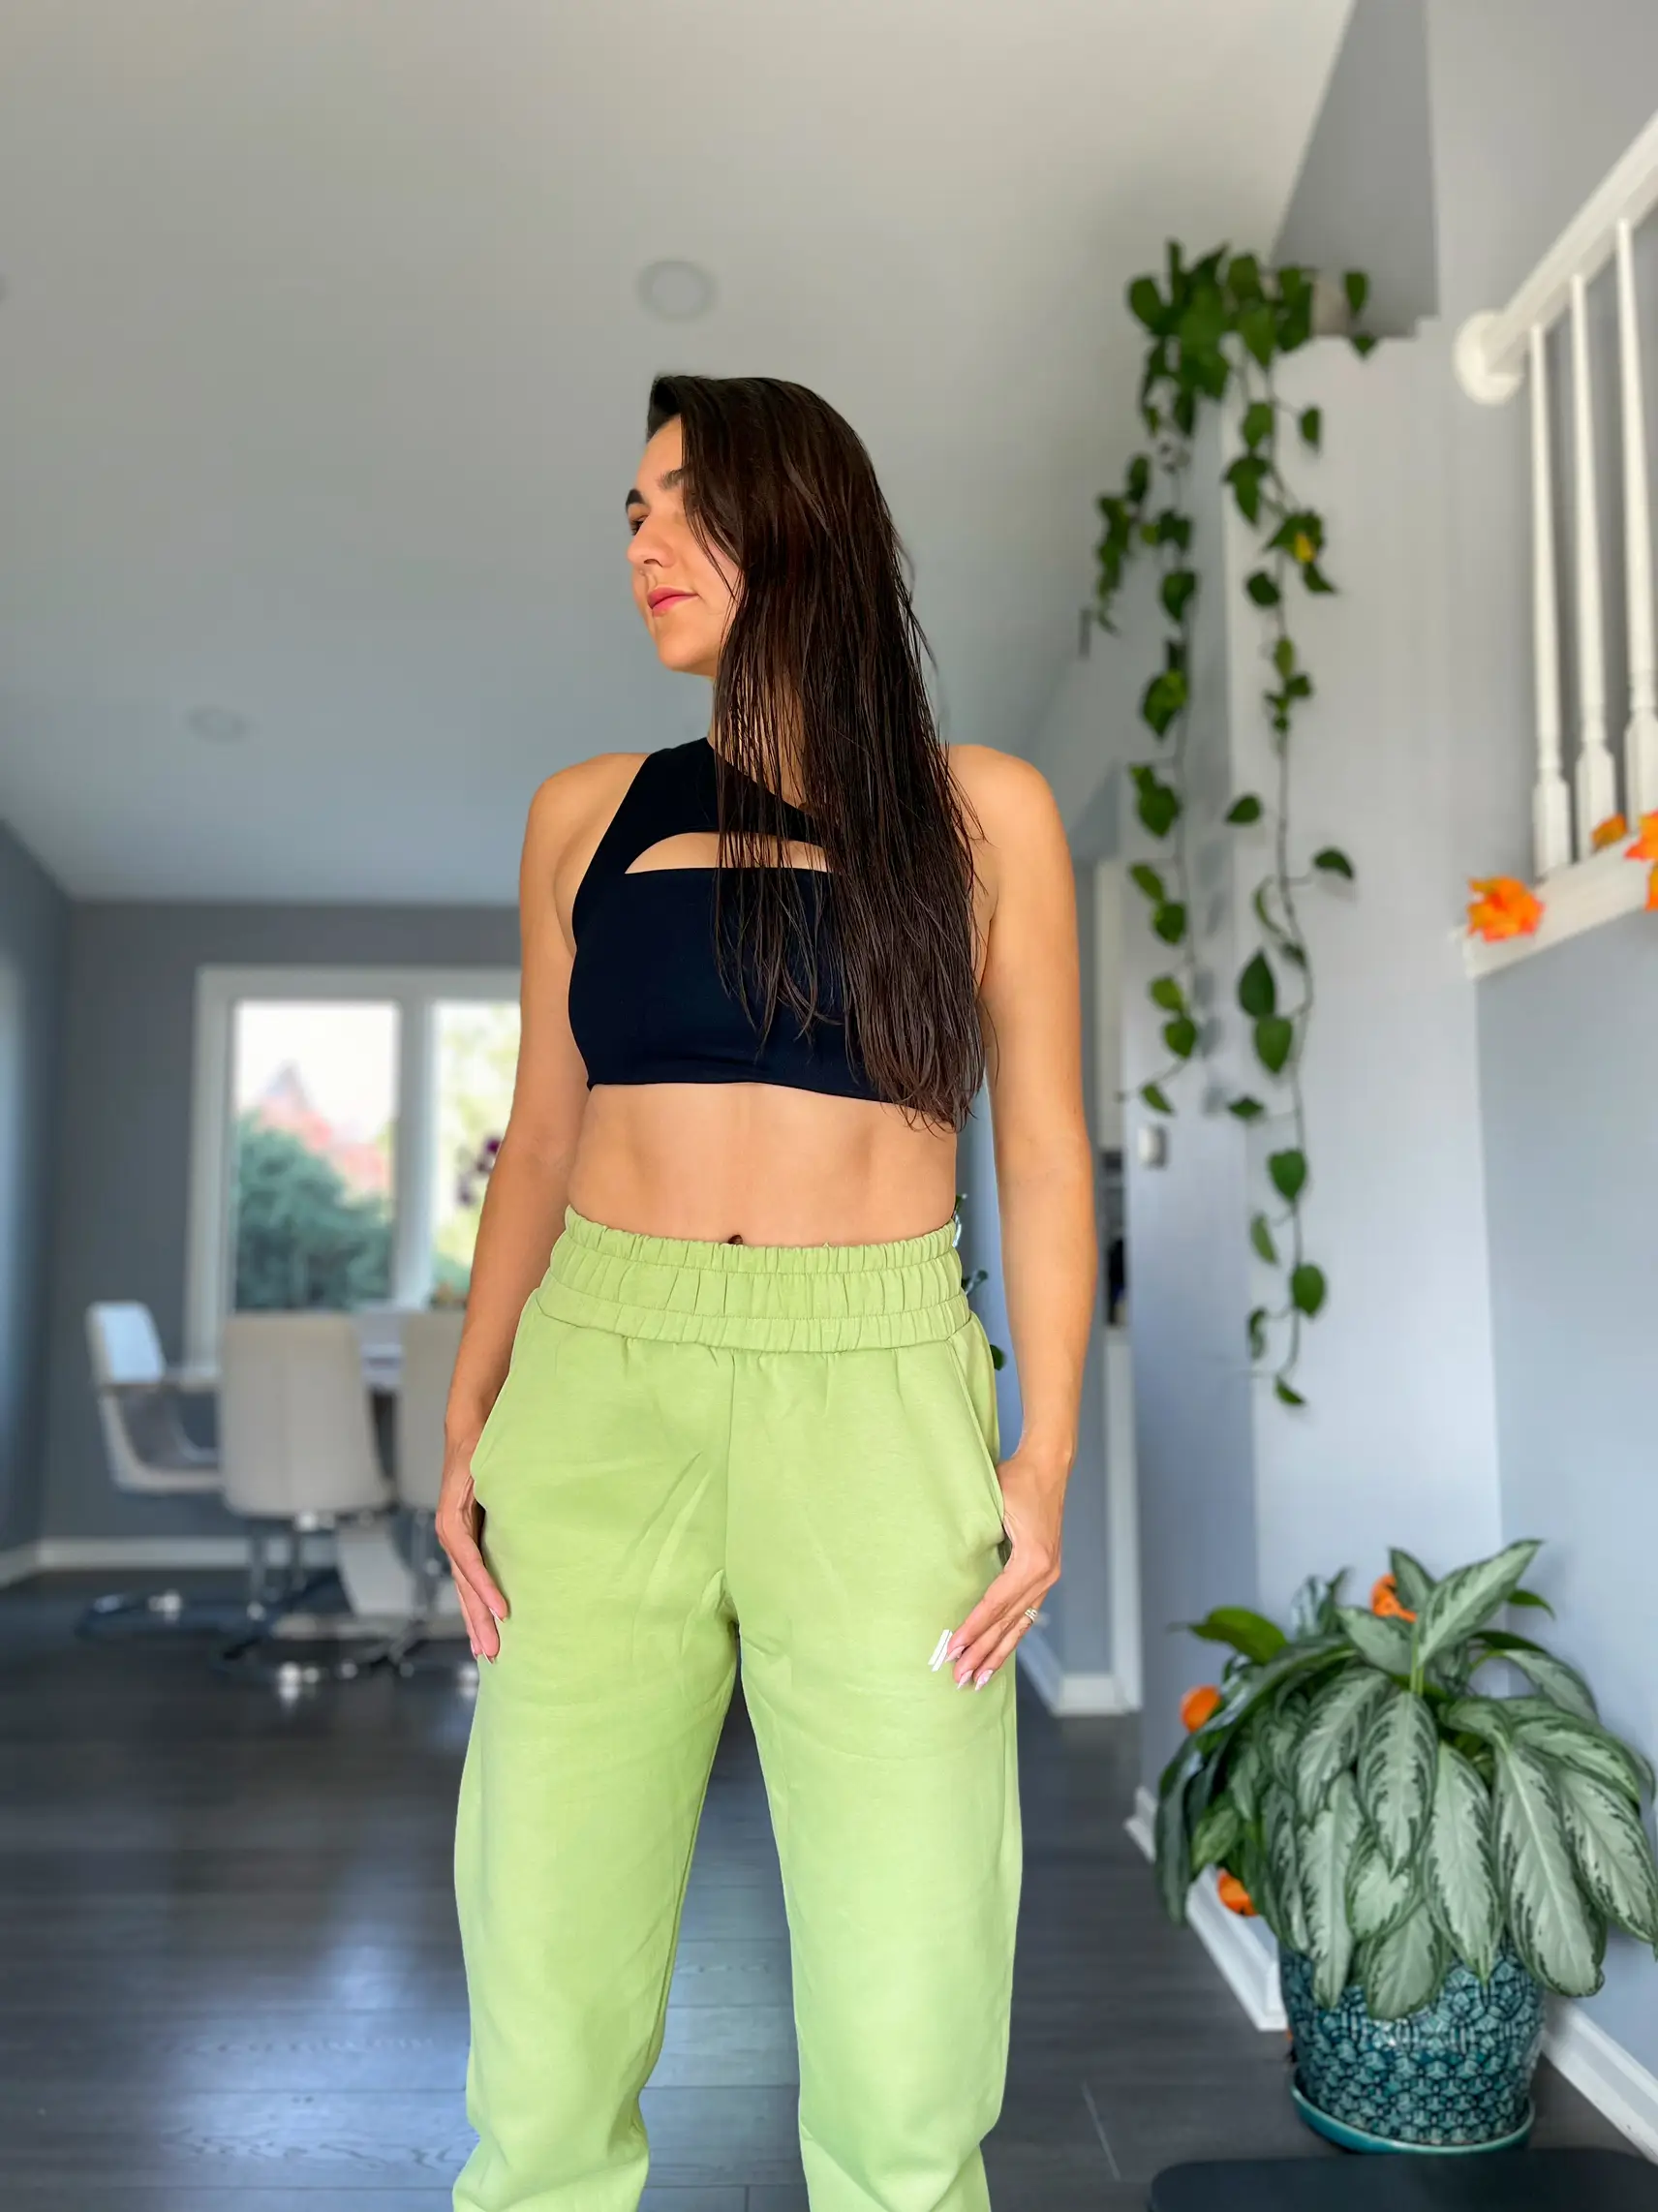 Workout Clothes Review  Gallery posted by Its.RosaJordana